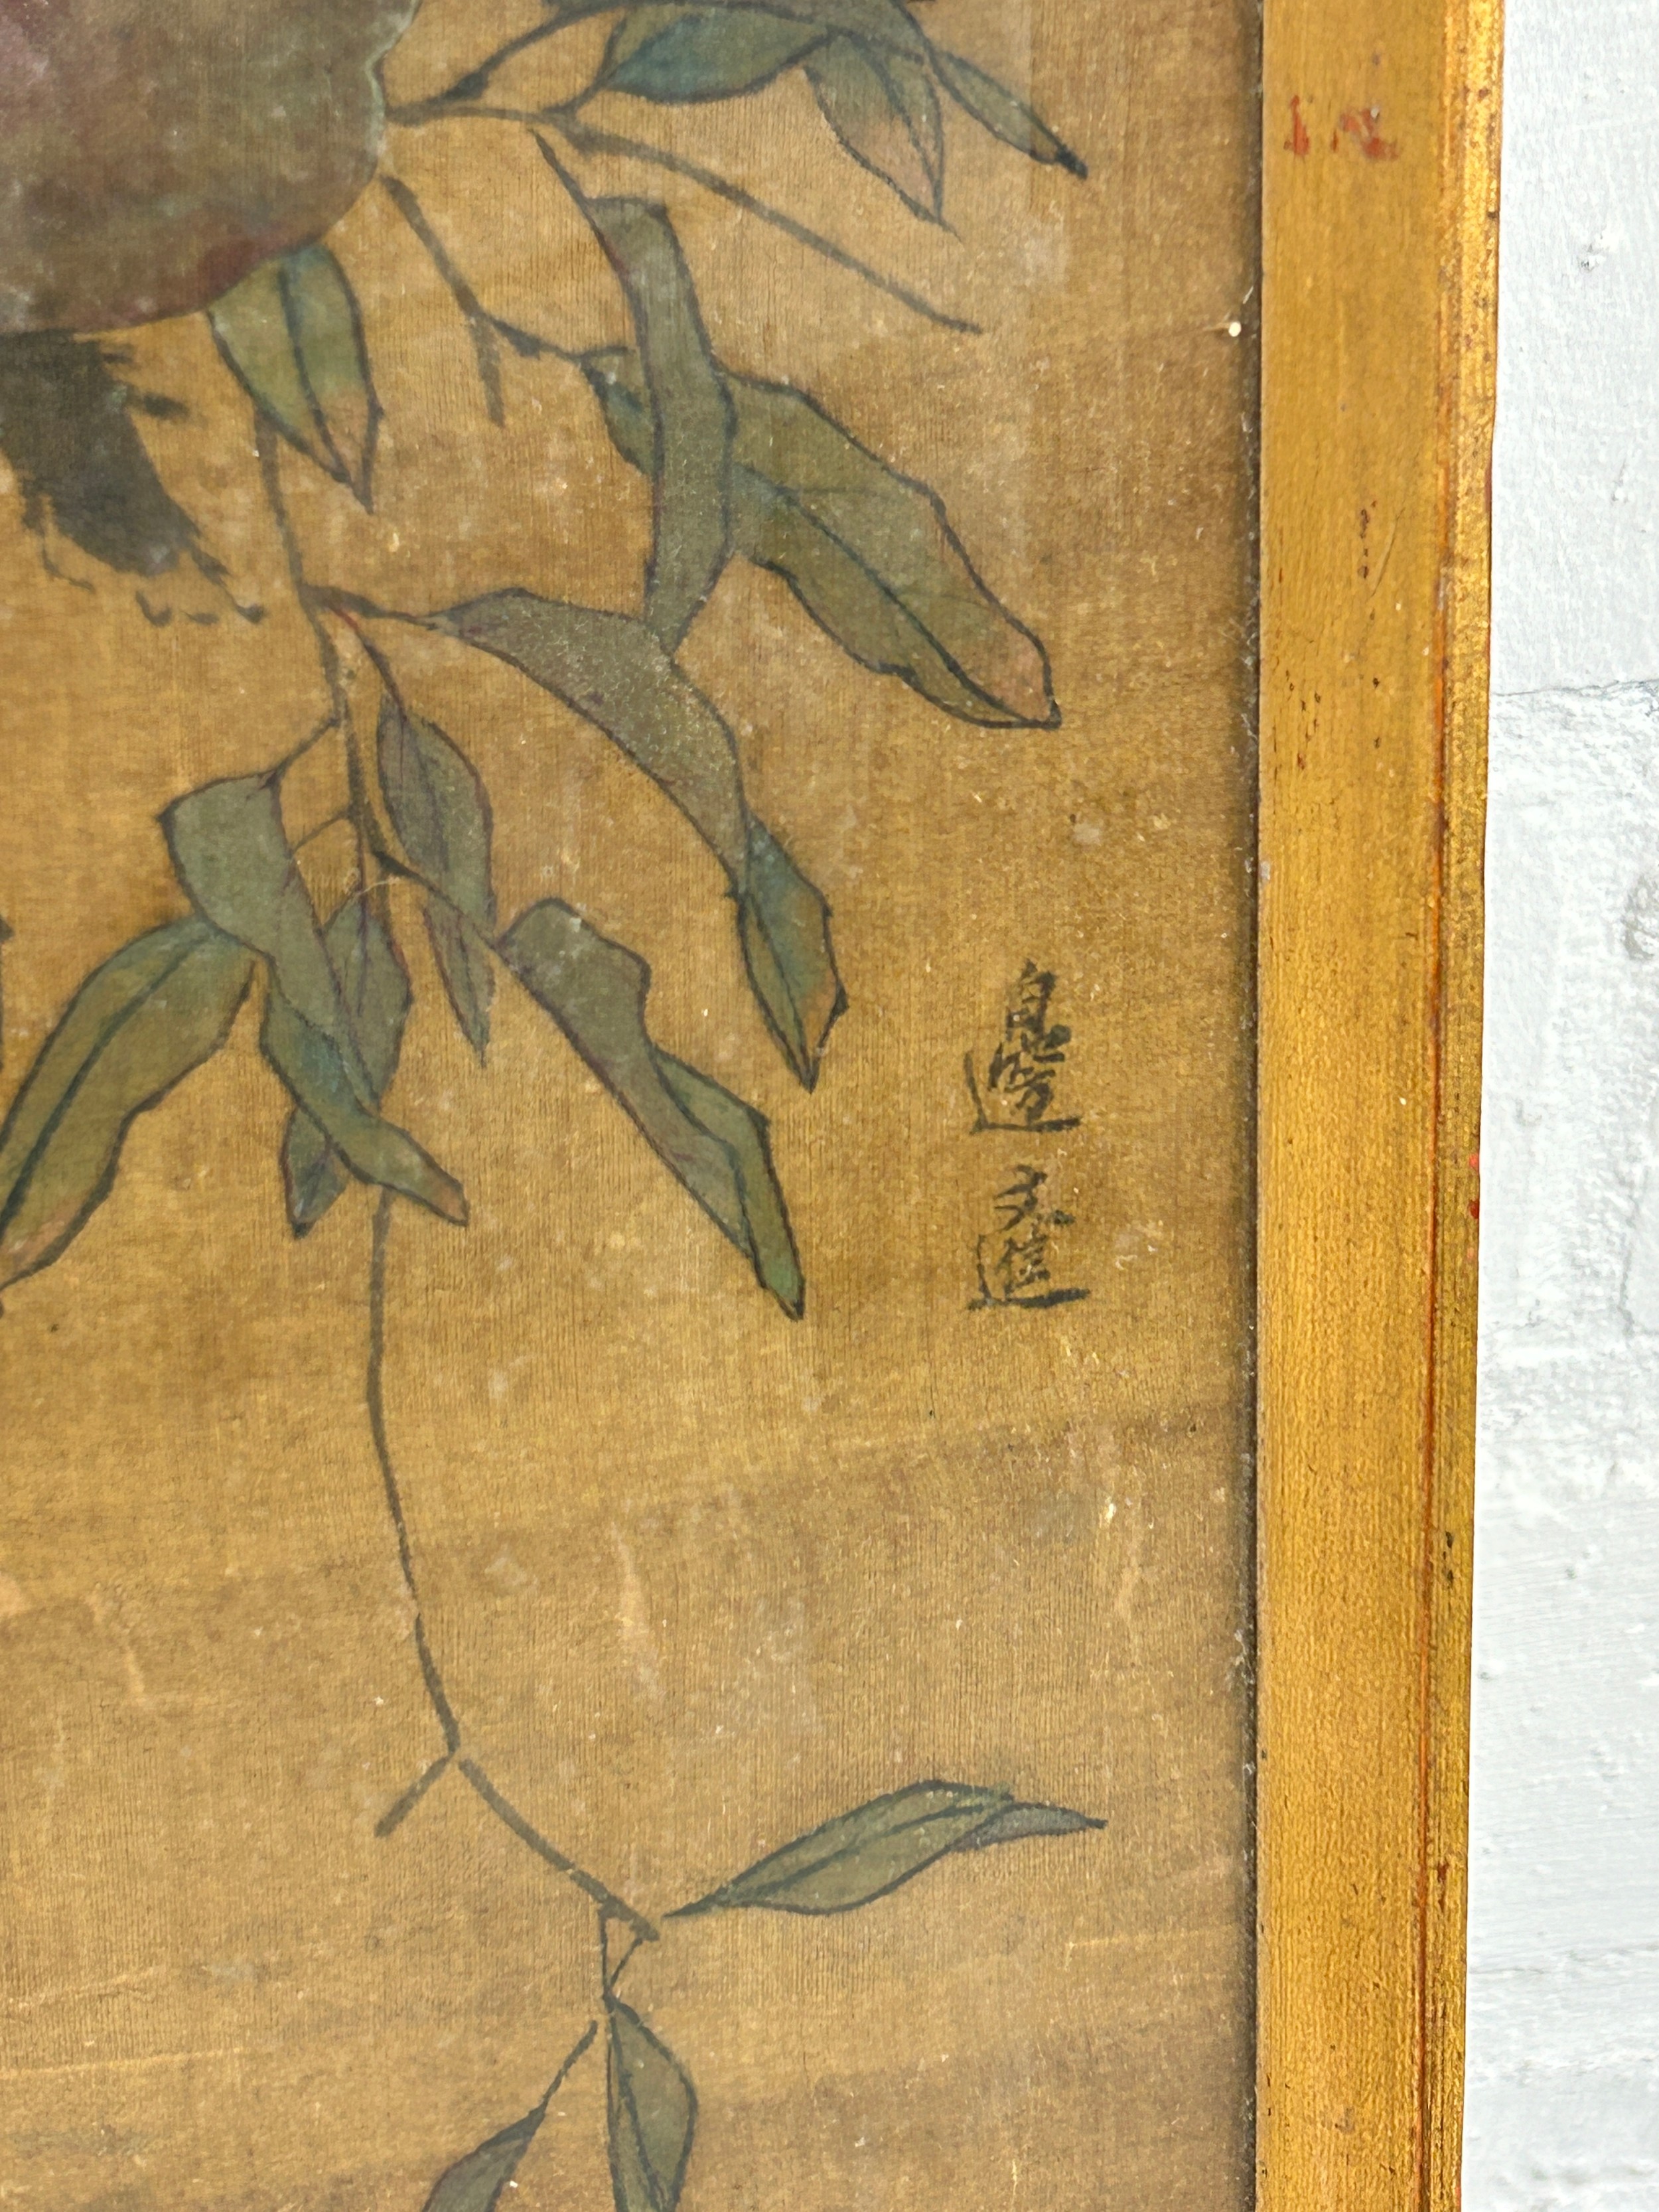 AFTER BIAN WEN JIN (MING DYNASTY ACTIVE 15TH CENTURY): A CHINESE PAINTING ON SILK DEPICTING A BIRD - Image 6 of 7